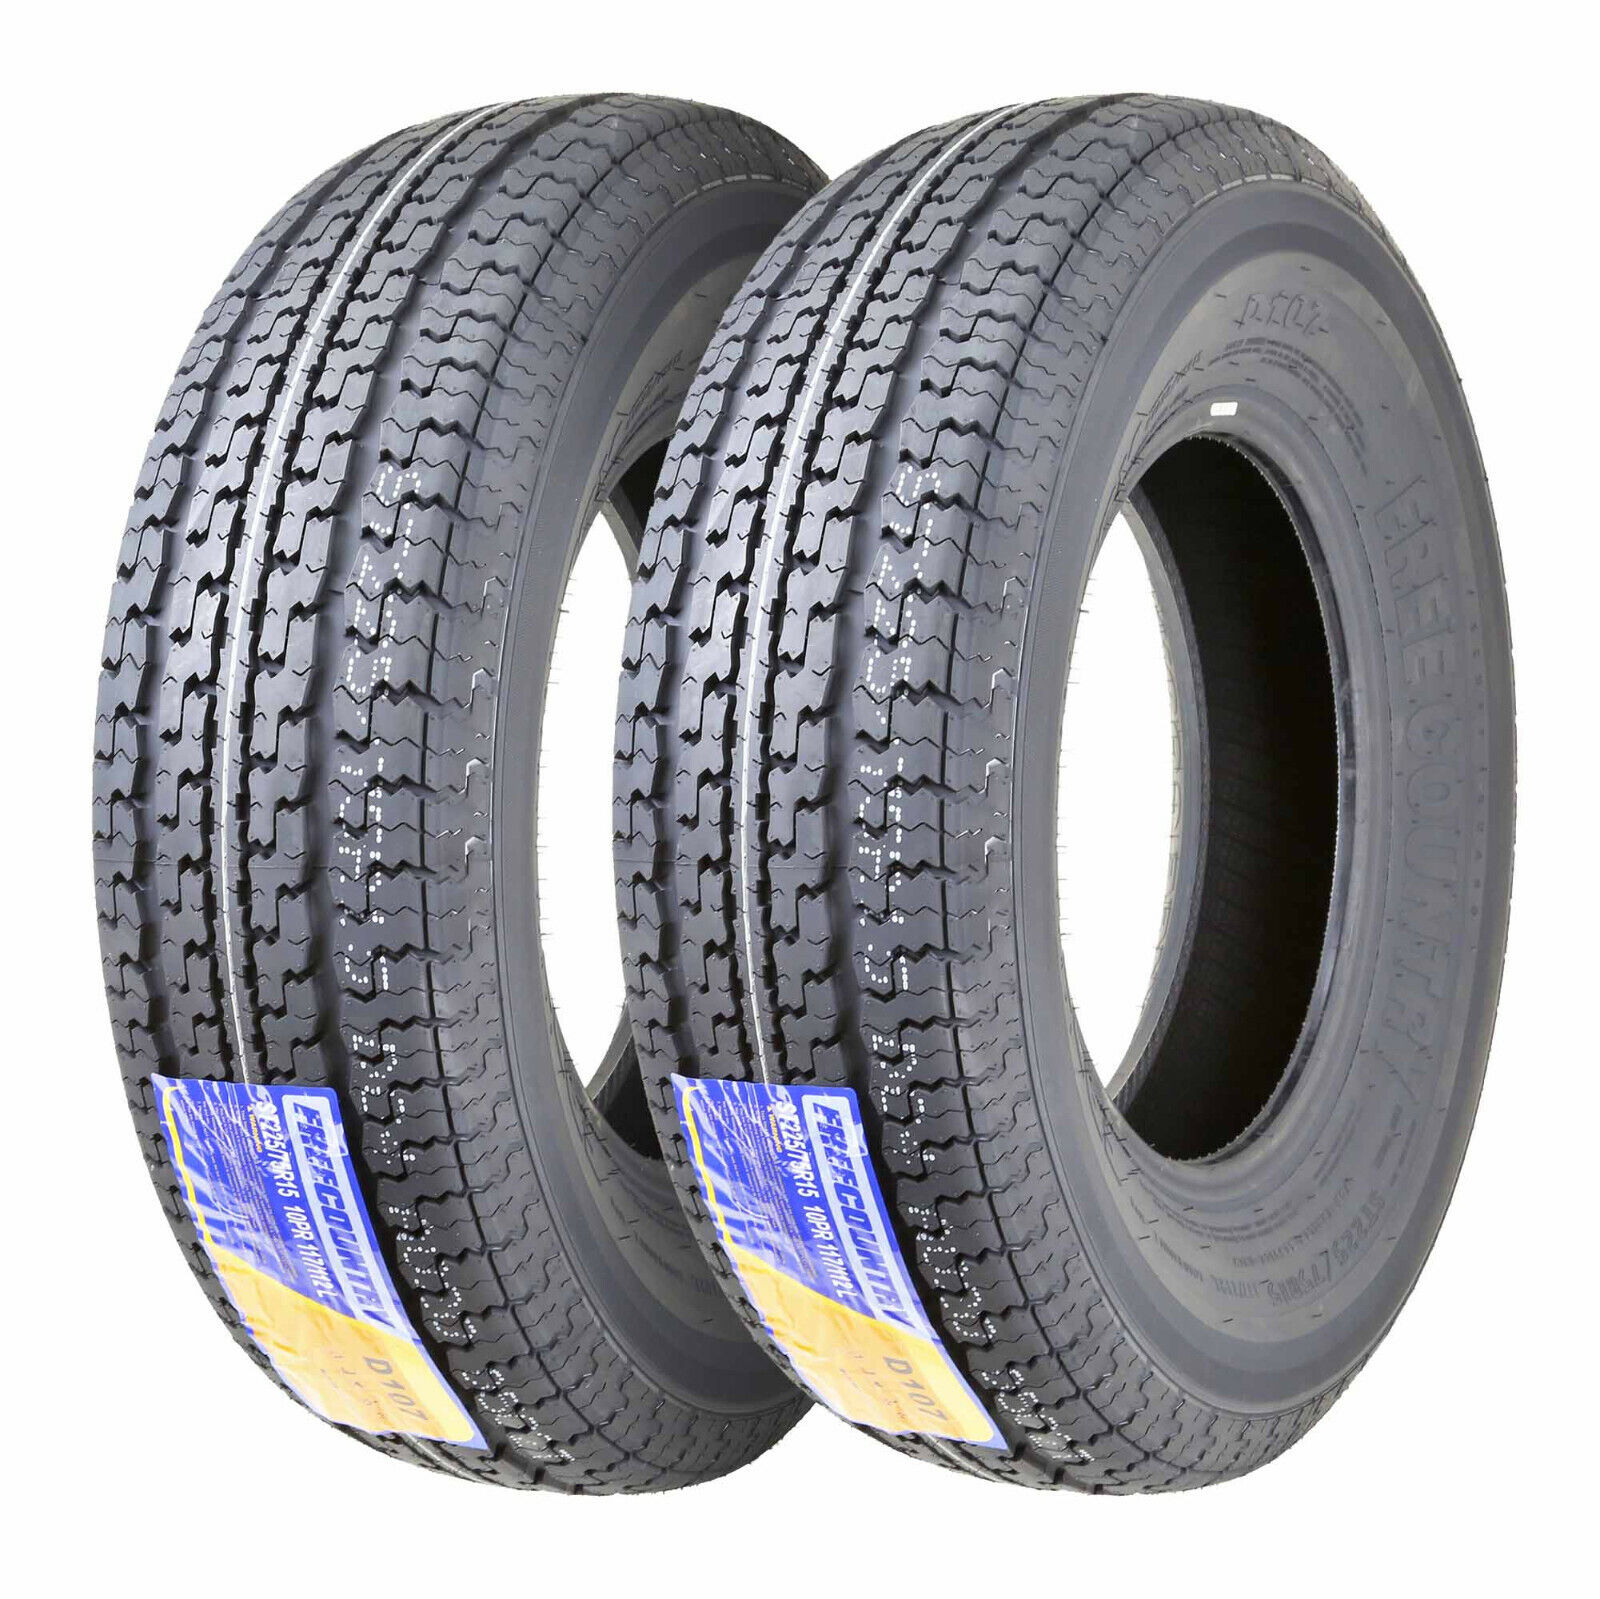 2 FREE COUNTRY ST225/75R15 Trailer Tires 225 75 15 Radial 10PR LRE w/Scuff Guard